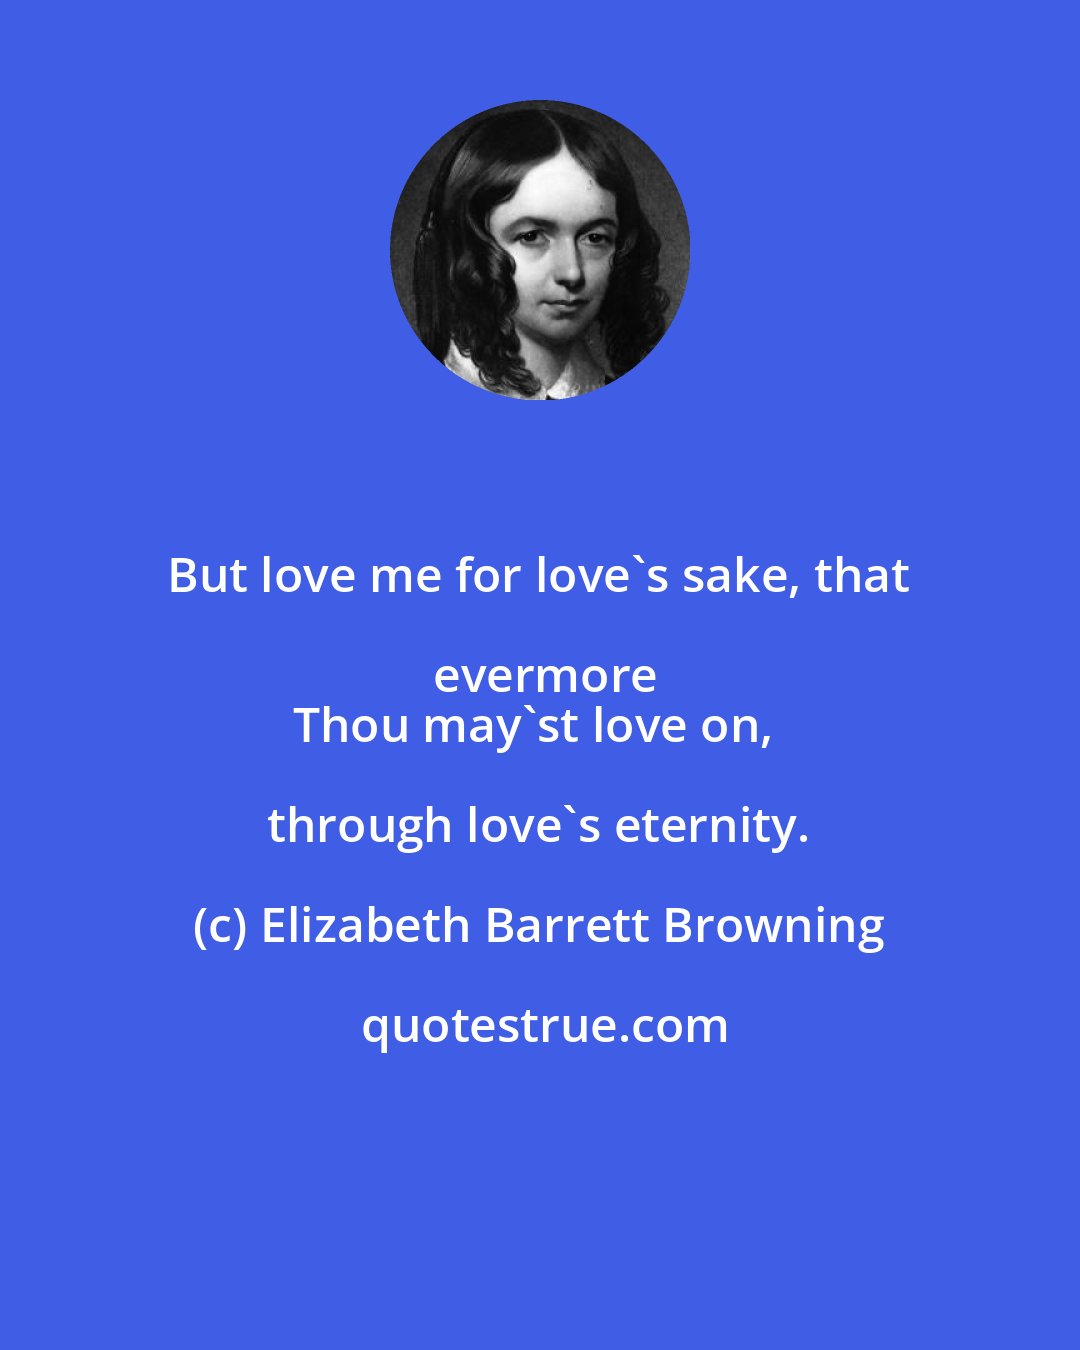 Elizabeth Barrett Browning: But love me for love's sake, that evermore
Thou may'st love on, through love's eternity.